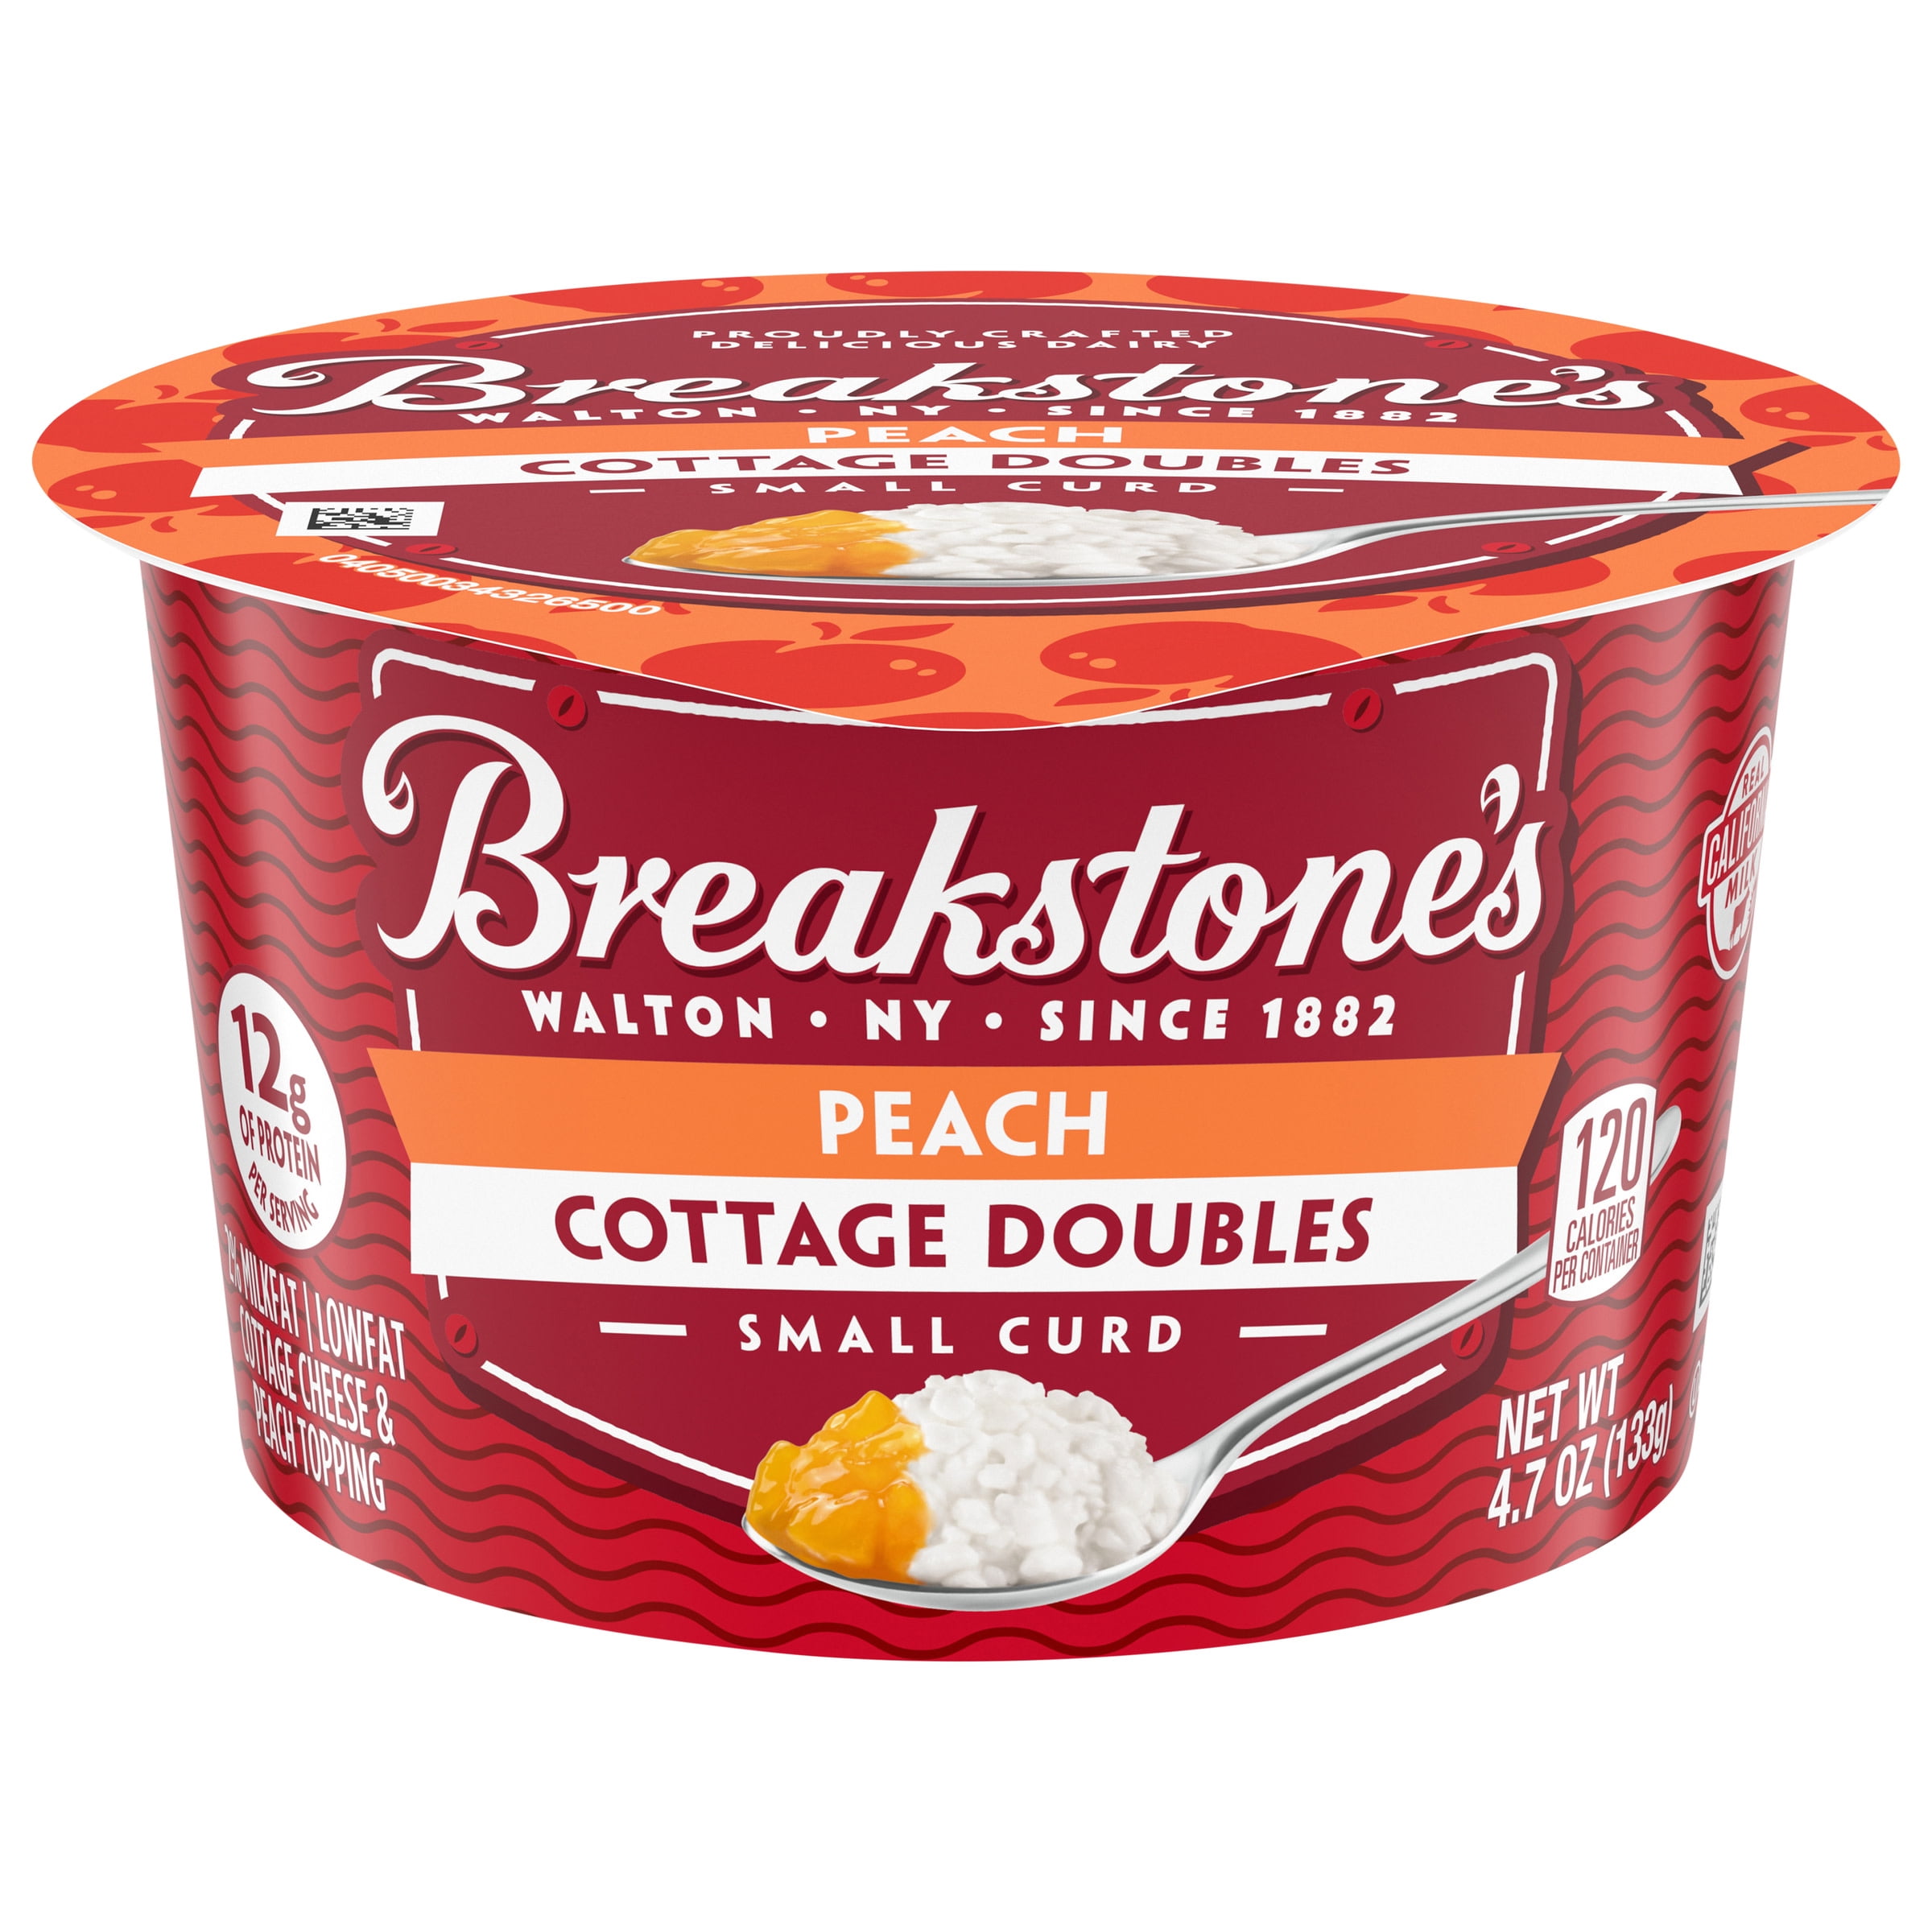 Breakstone's Cottage Doubles Lowfat Cottage Cheese & Peach Topping with 2% Milkfat, 4.7 oz Cup